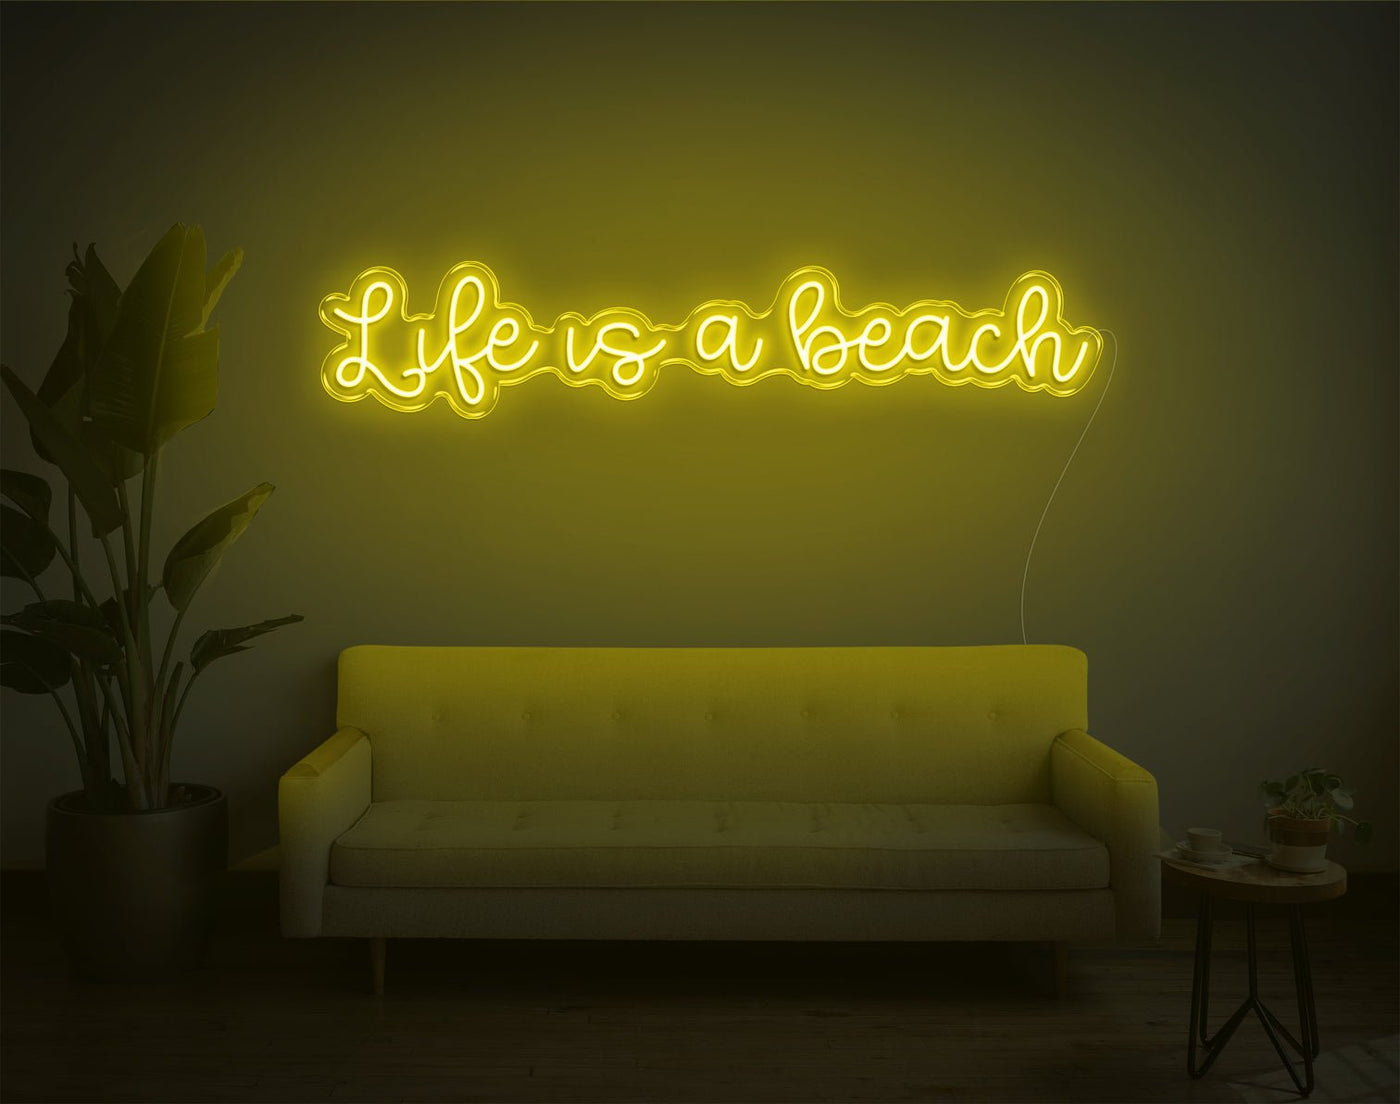 Life is a beach LED Neon Sign - 28inch x 7inchYellow